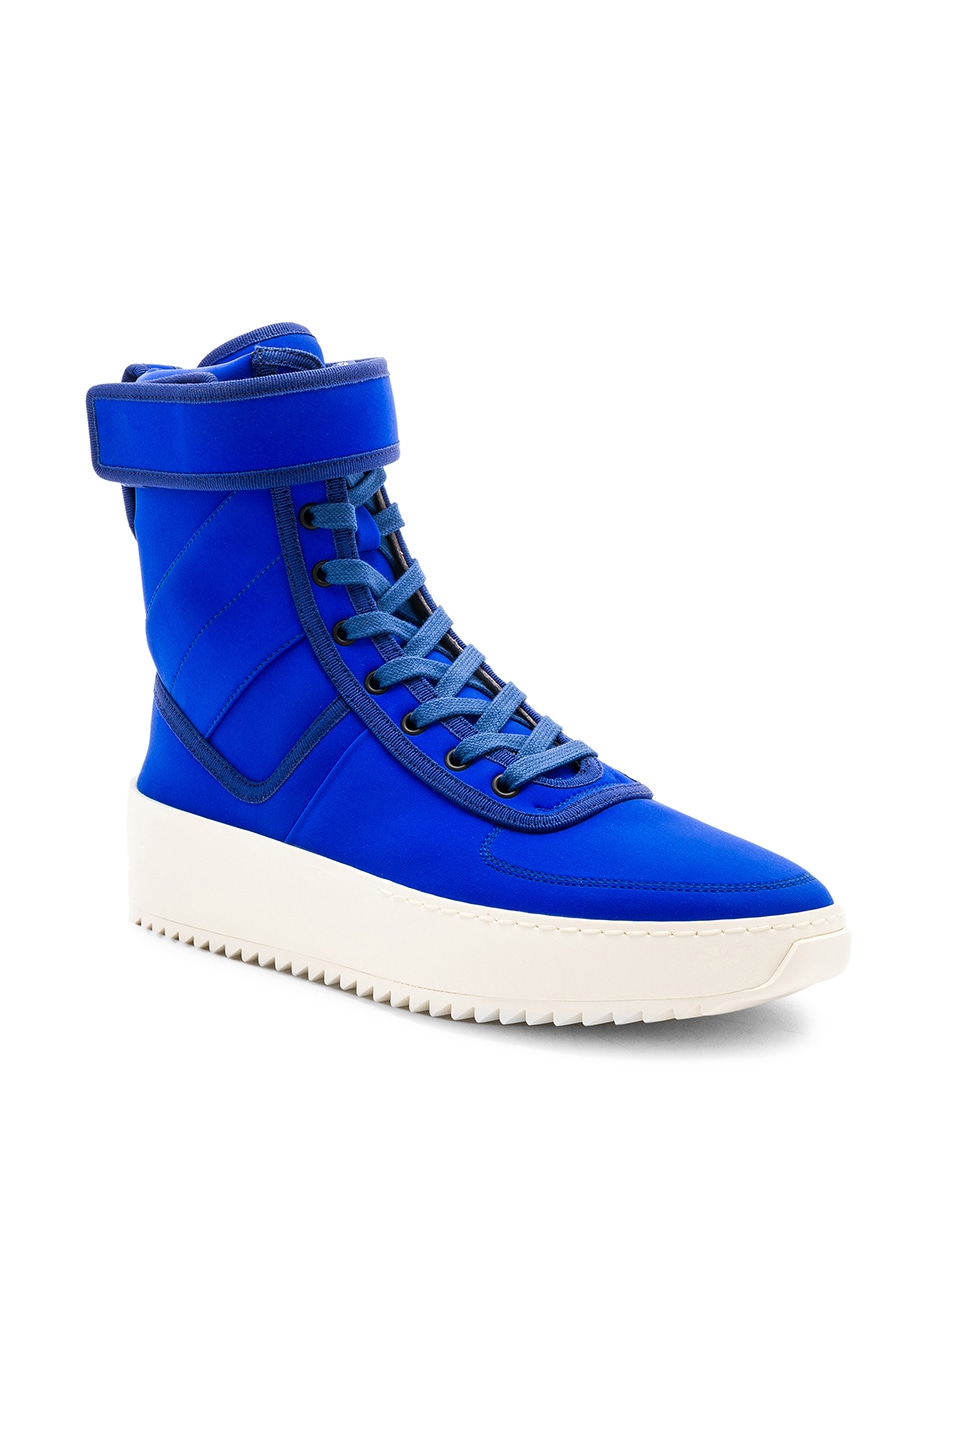 Image 1 of Fear of God Neoprene Military Sneakers in Royal Blue